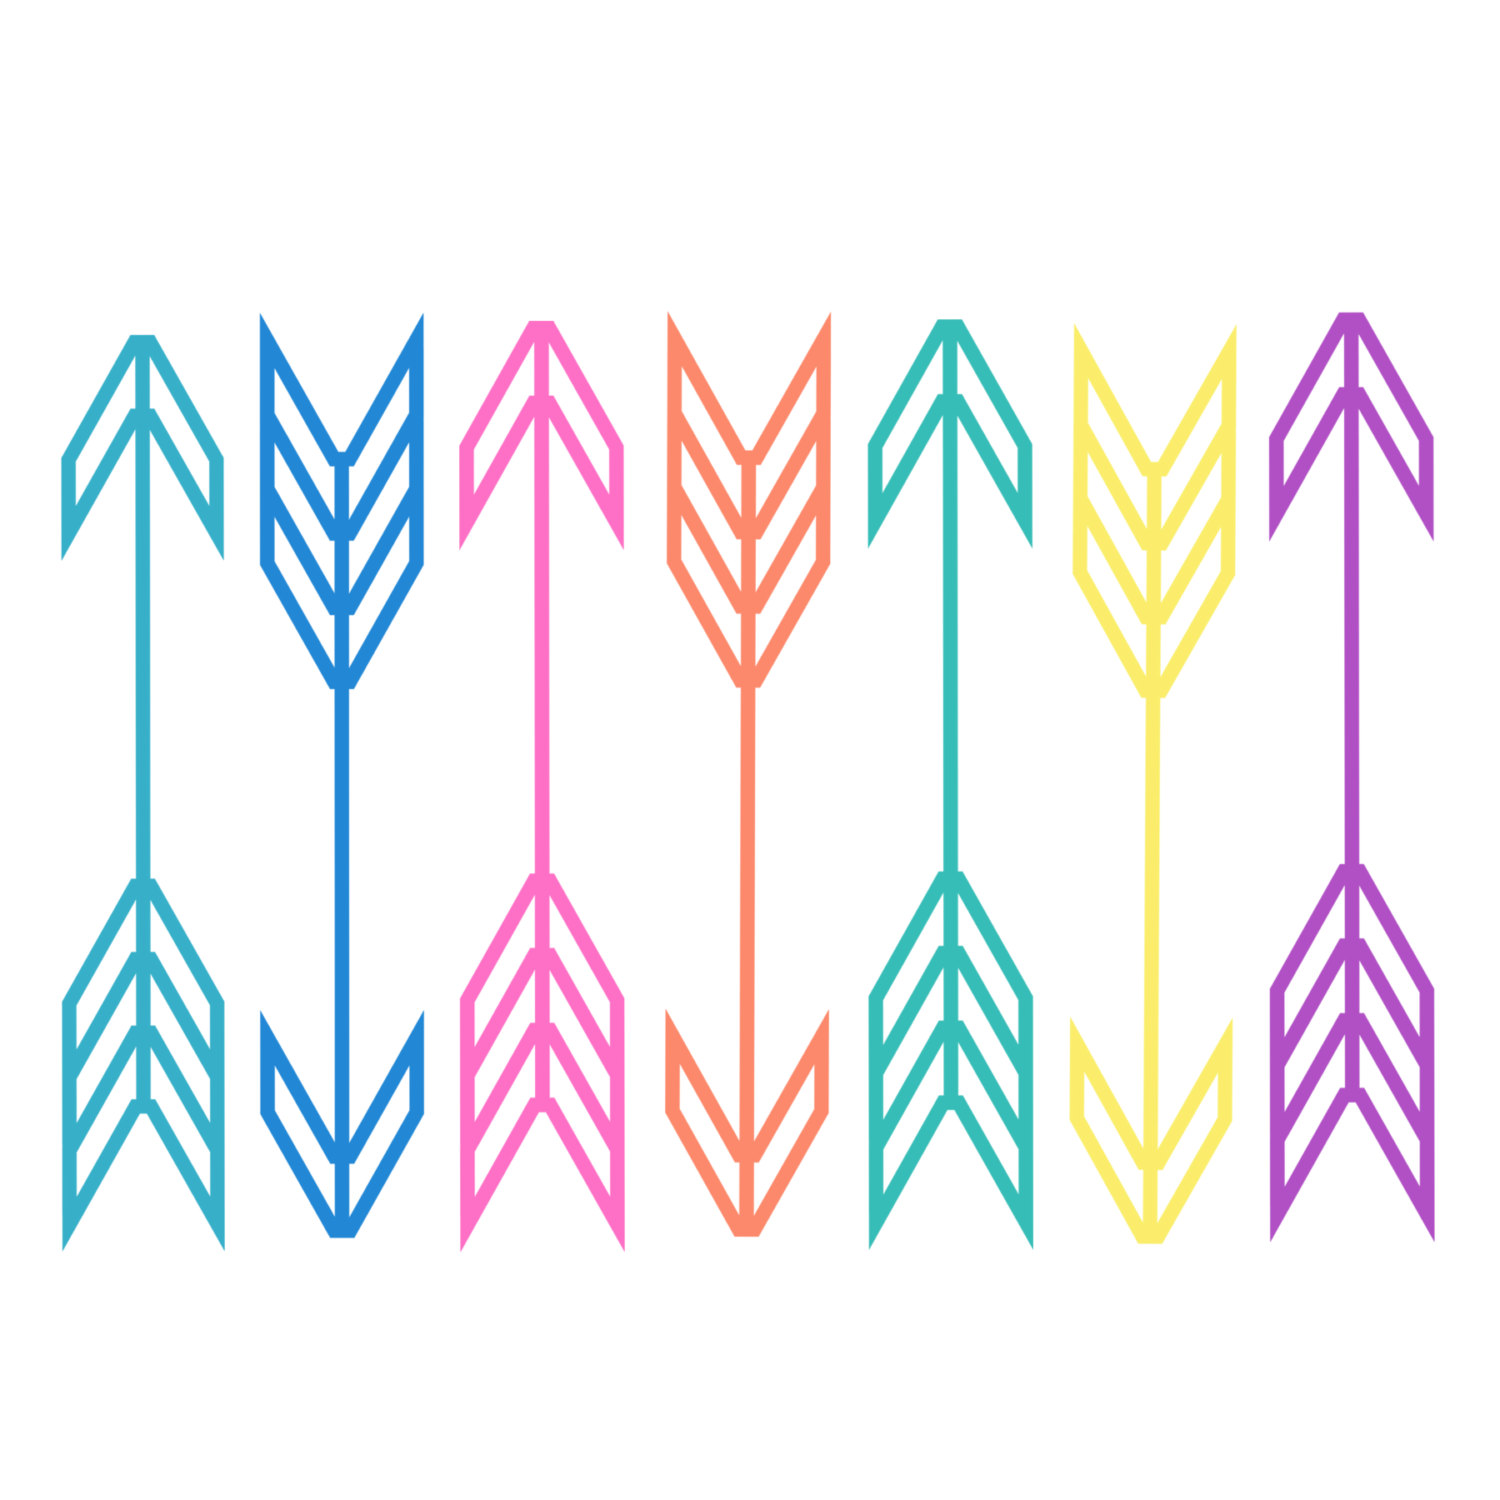 Popular items for neon arrow clipart on Etsy